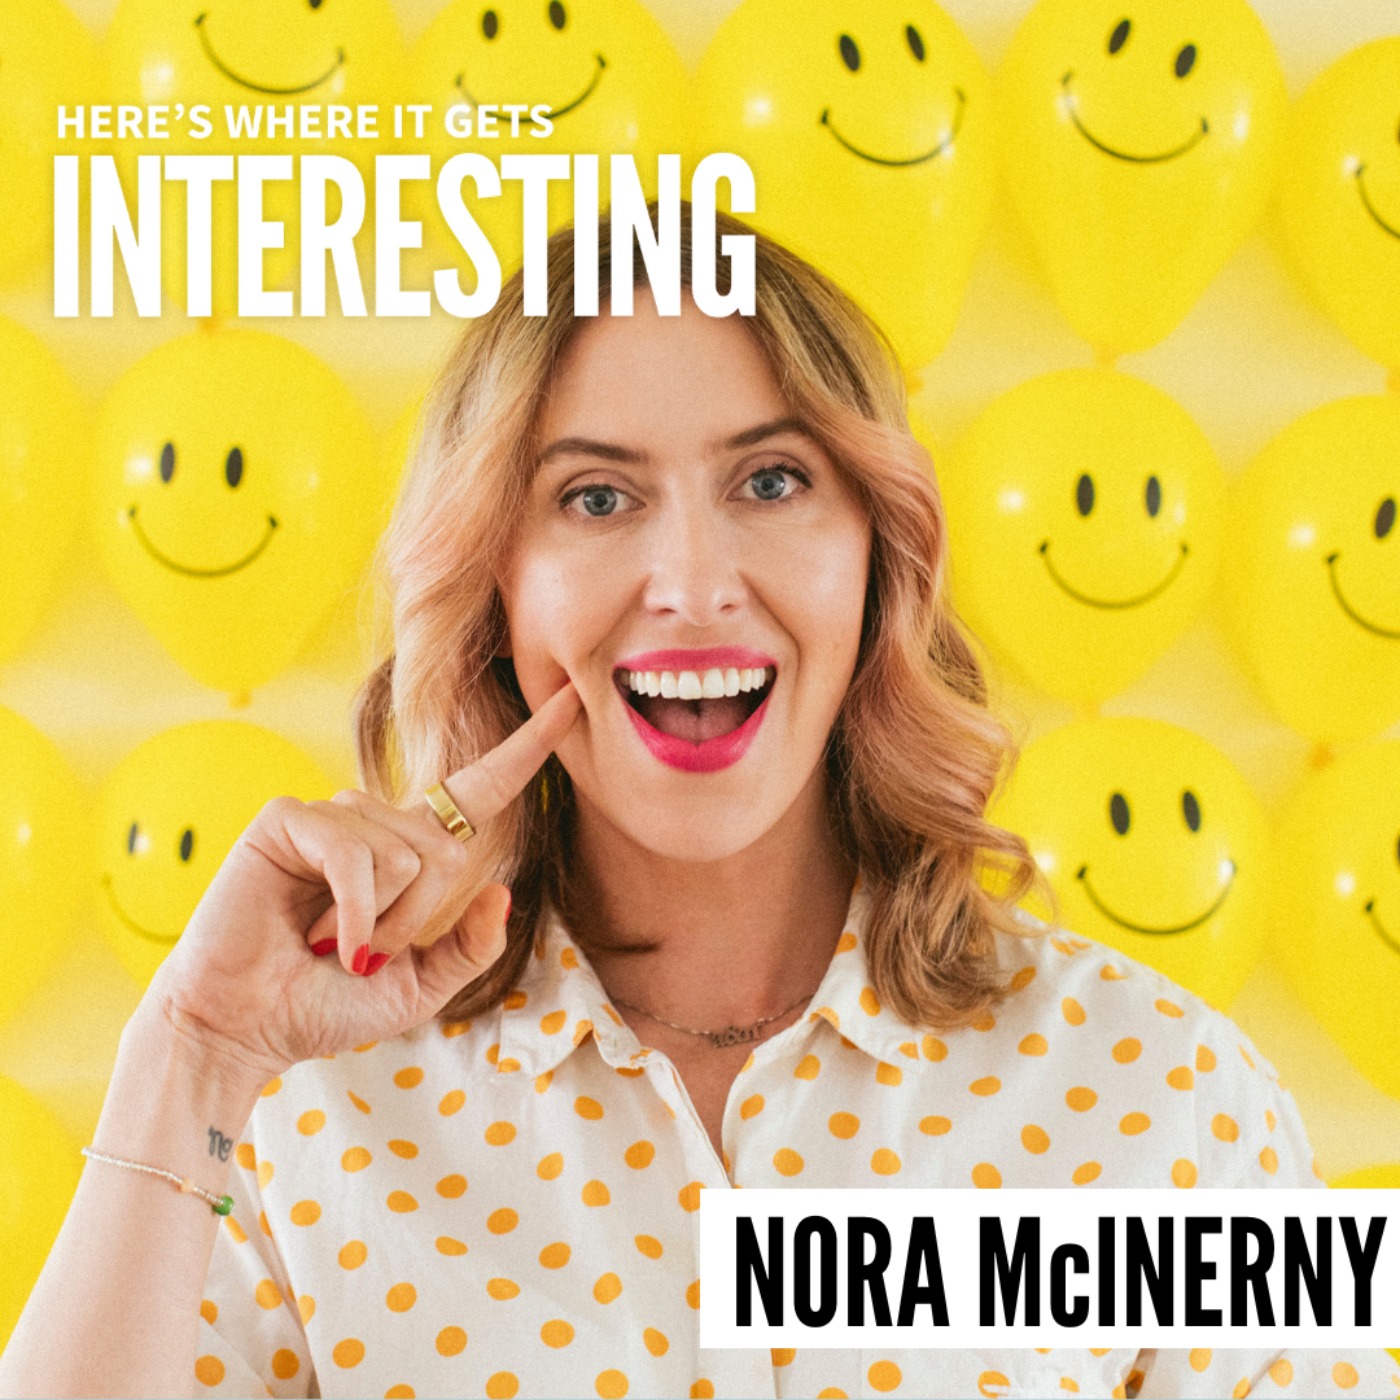 Find Relief in the Regular Stuff with Nora McInerny